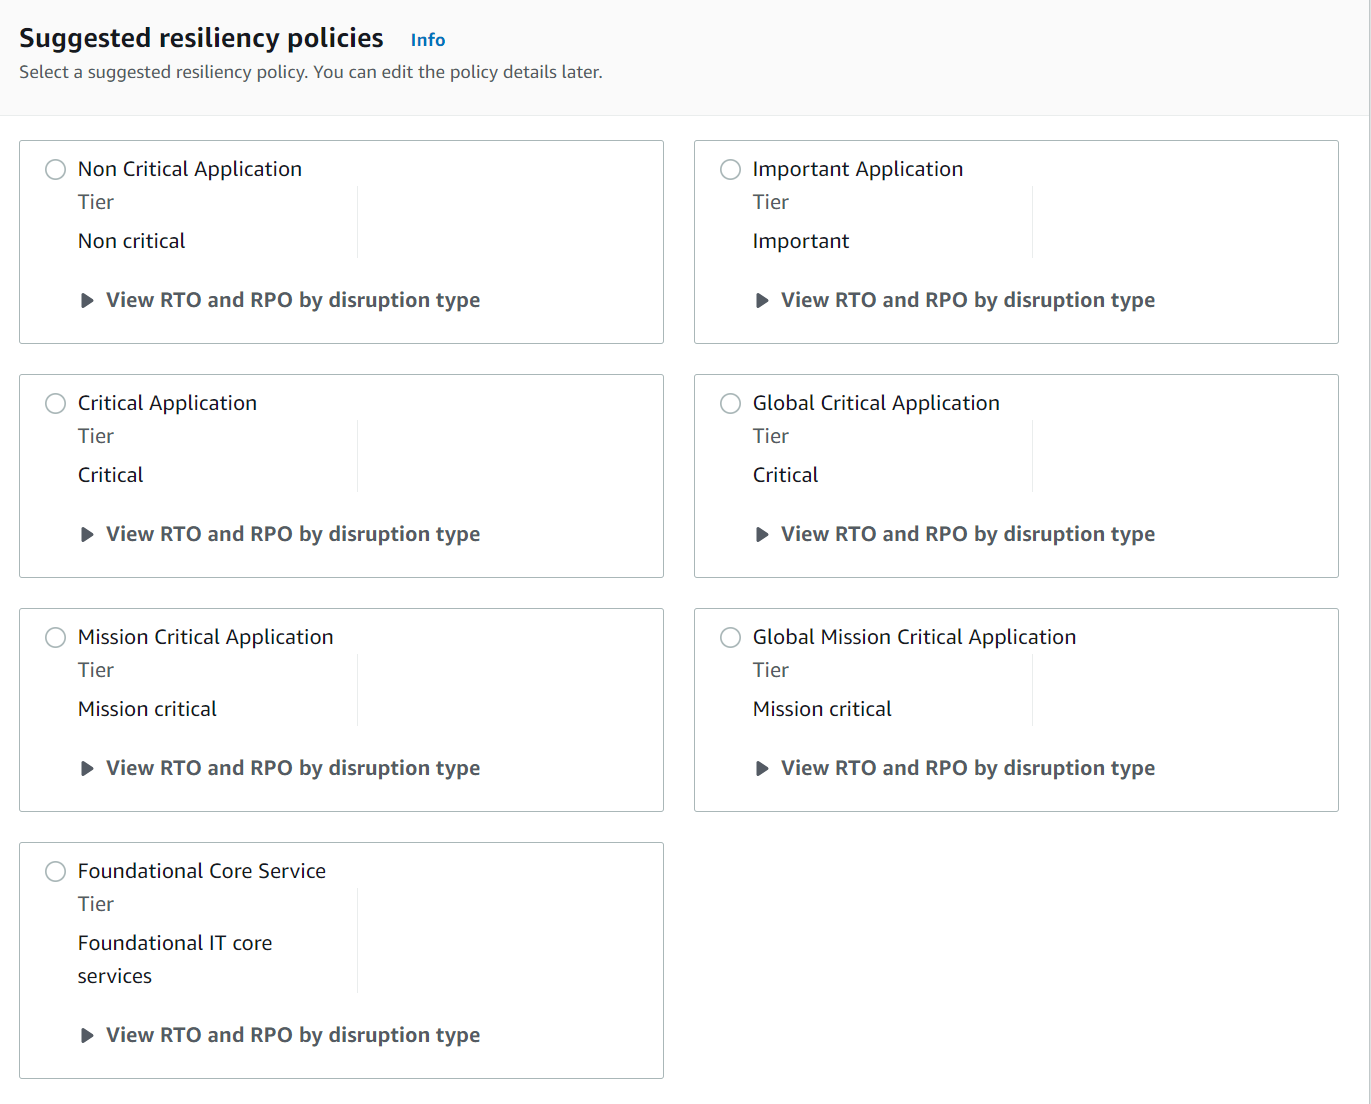 Image 3: AWS Resilience Hub contains suggested resiliency policies, each with unique RTO and RPO targets.